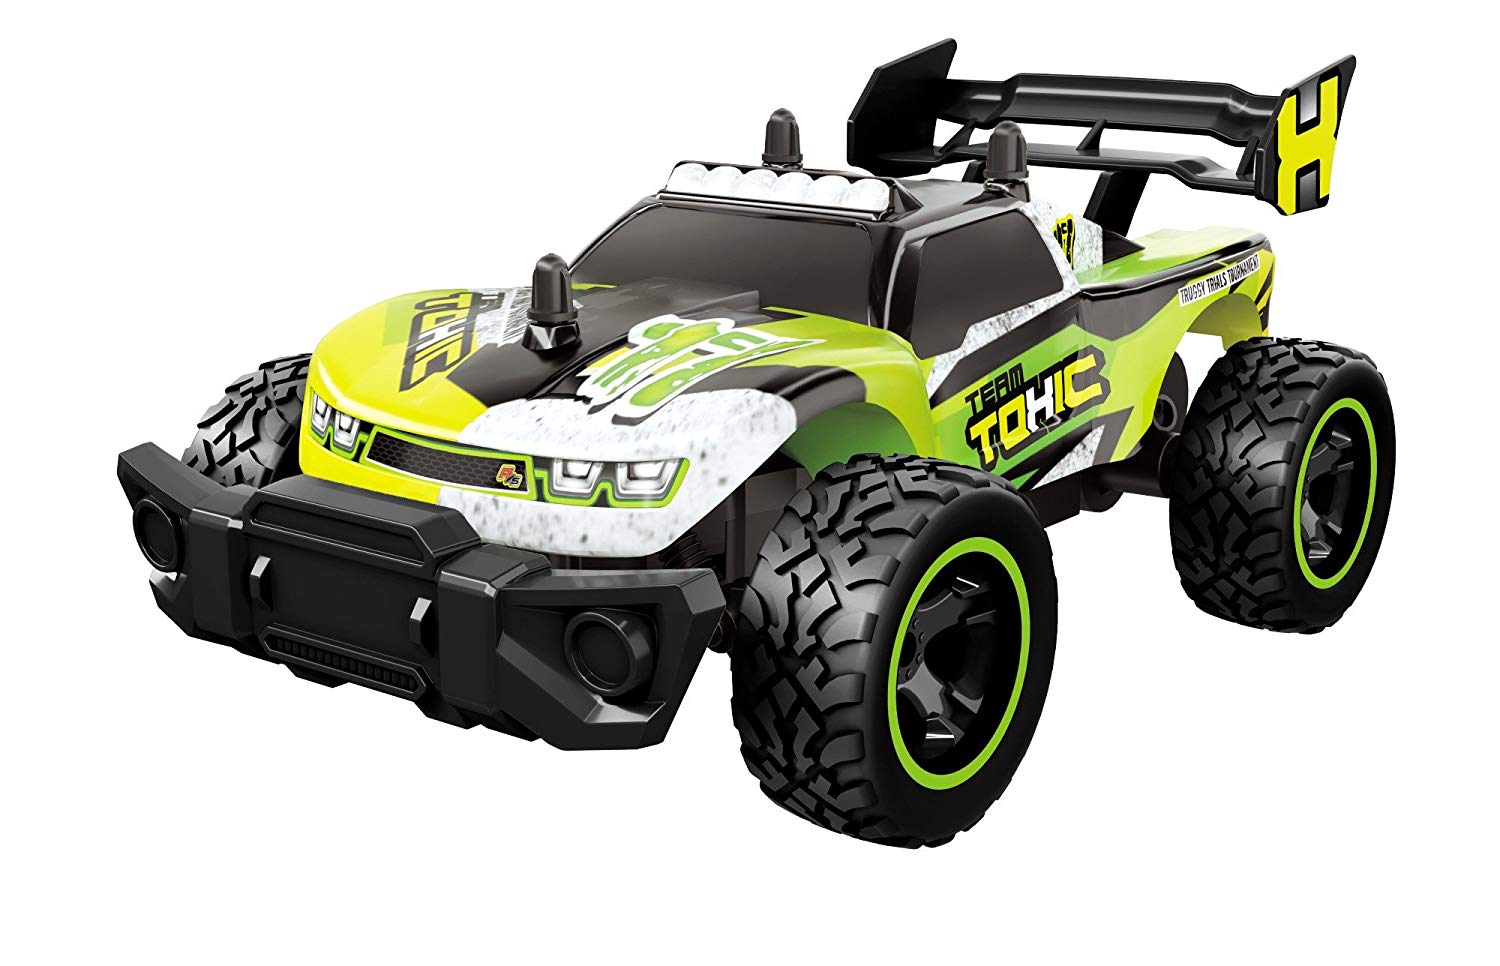 Dickie Toys 201119114 Rc Toxic Flash Remote Control Vehicle